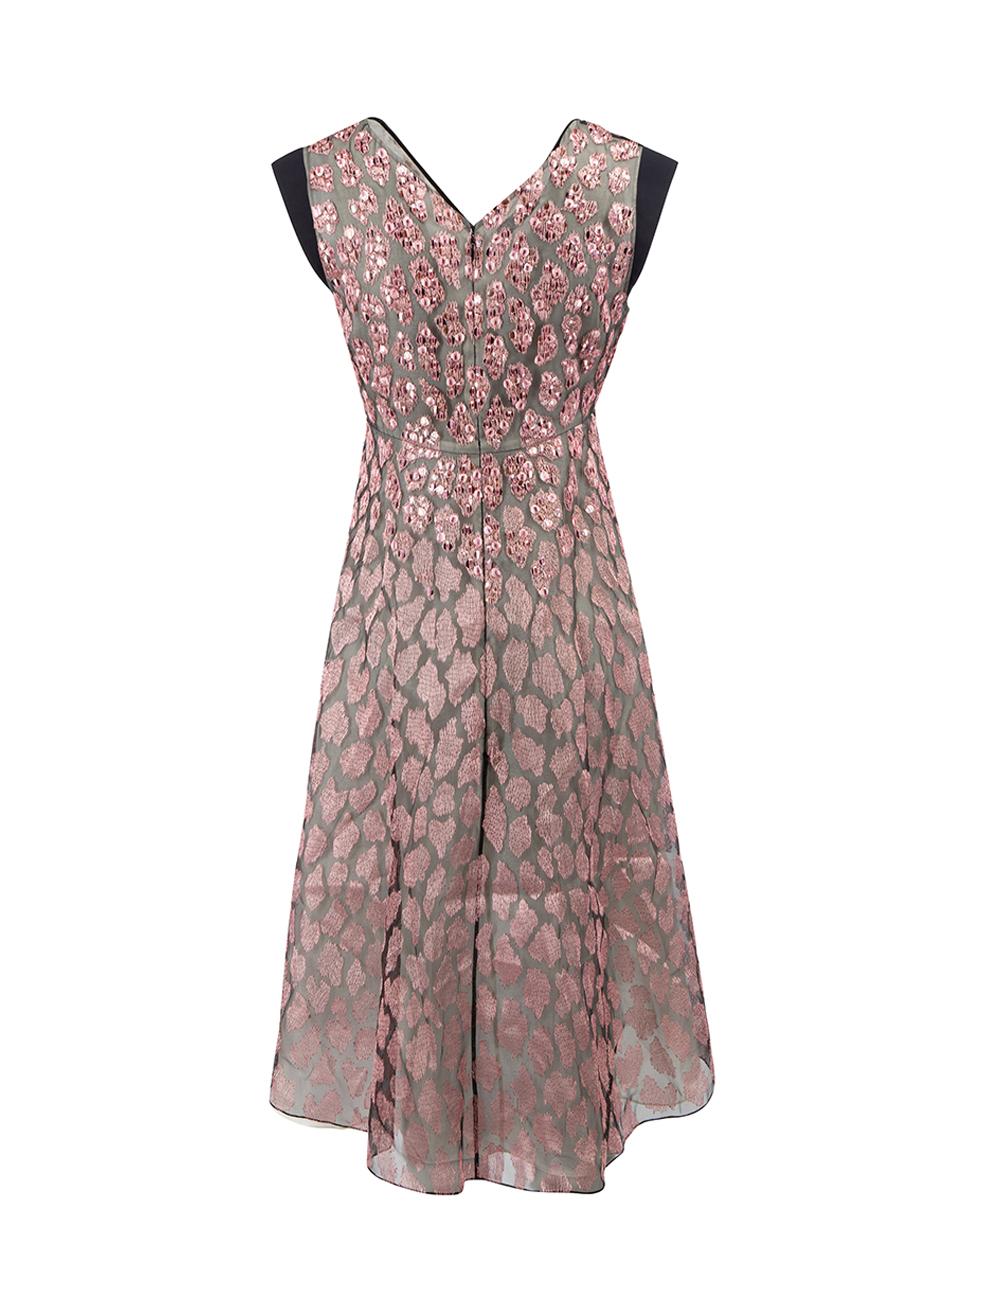 Christian Dior Pink Silk Sequin Embellished Sleeveless Knee Length Dress Size M In Good Condition For Sale In London, GB